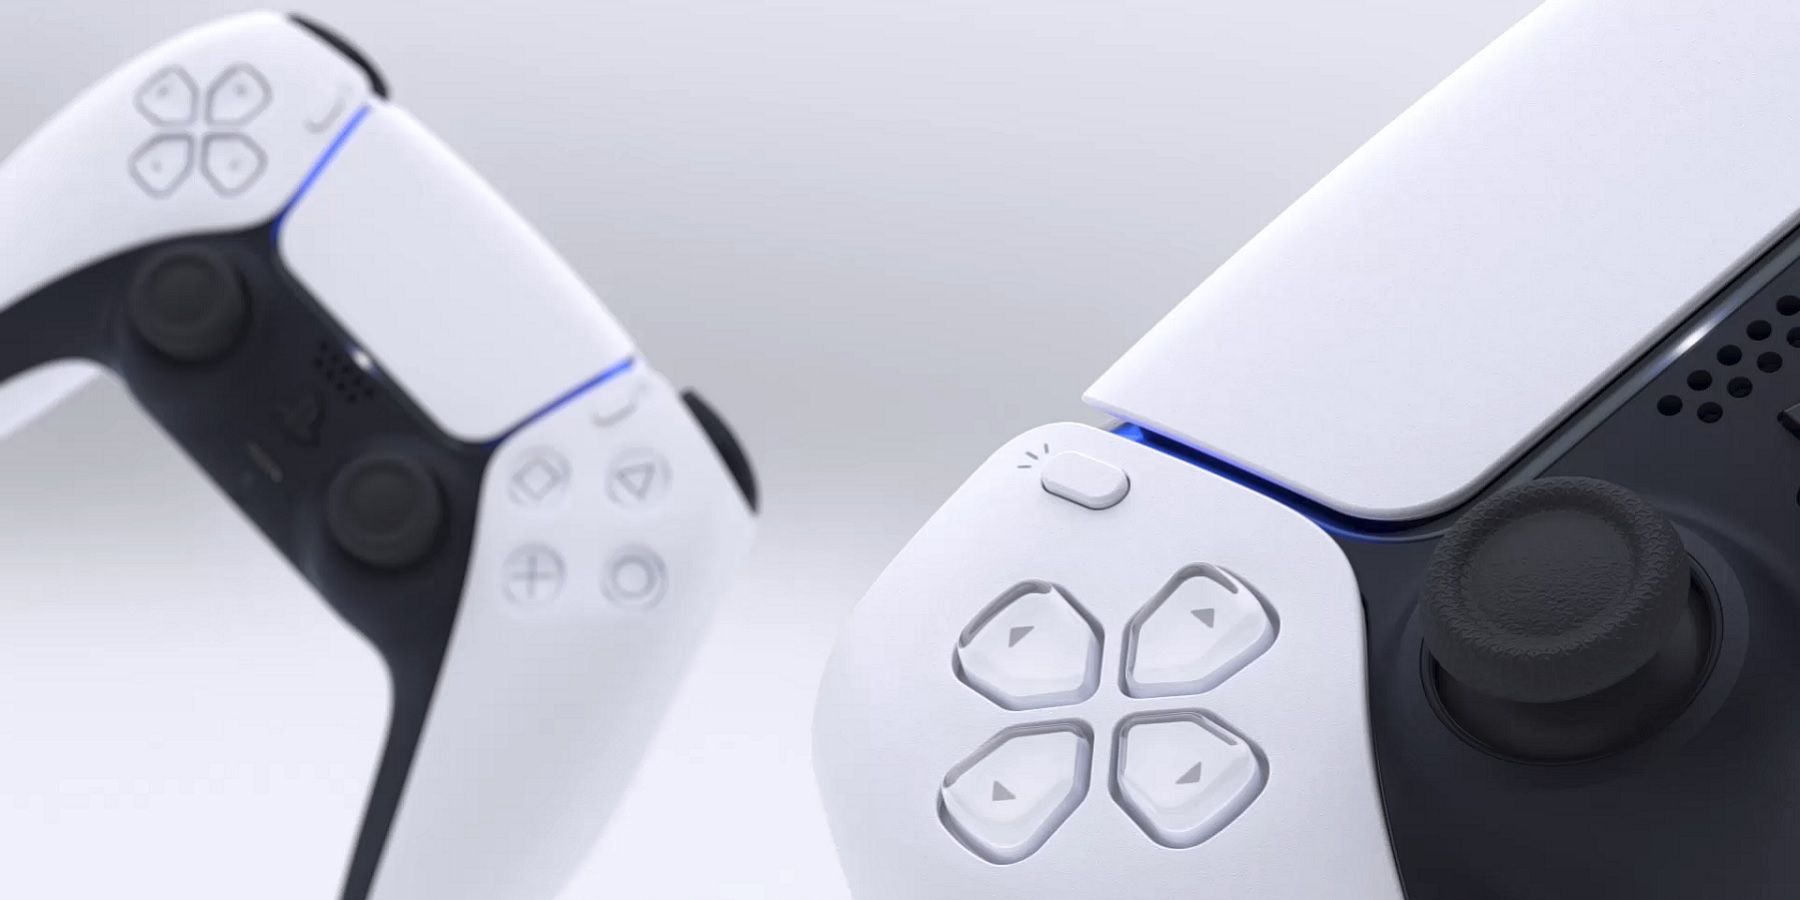 playstation dualsense controllers